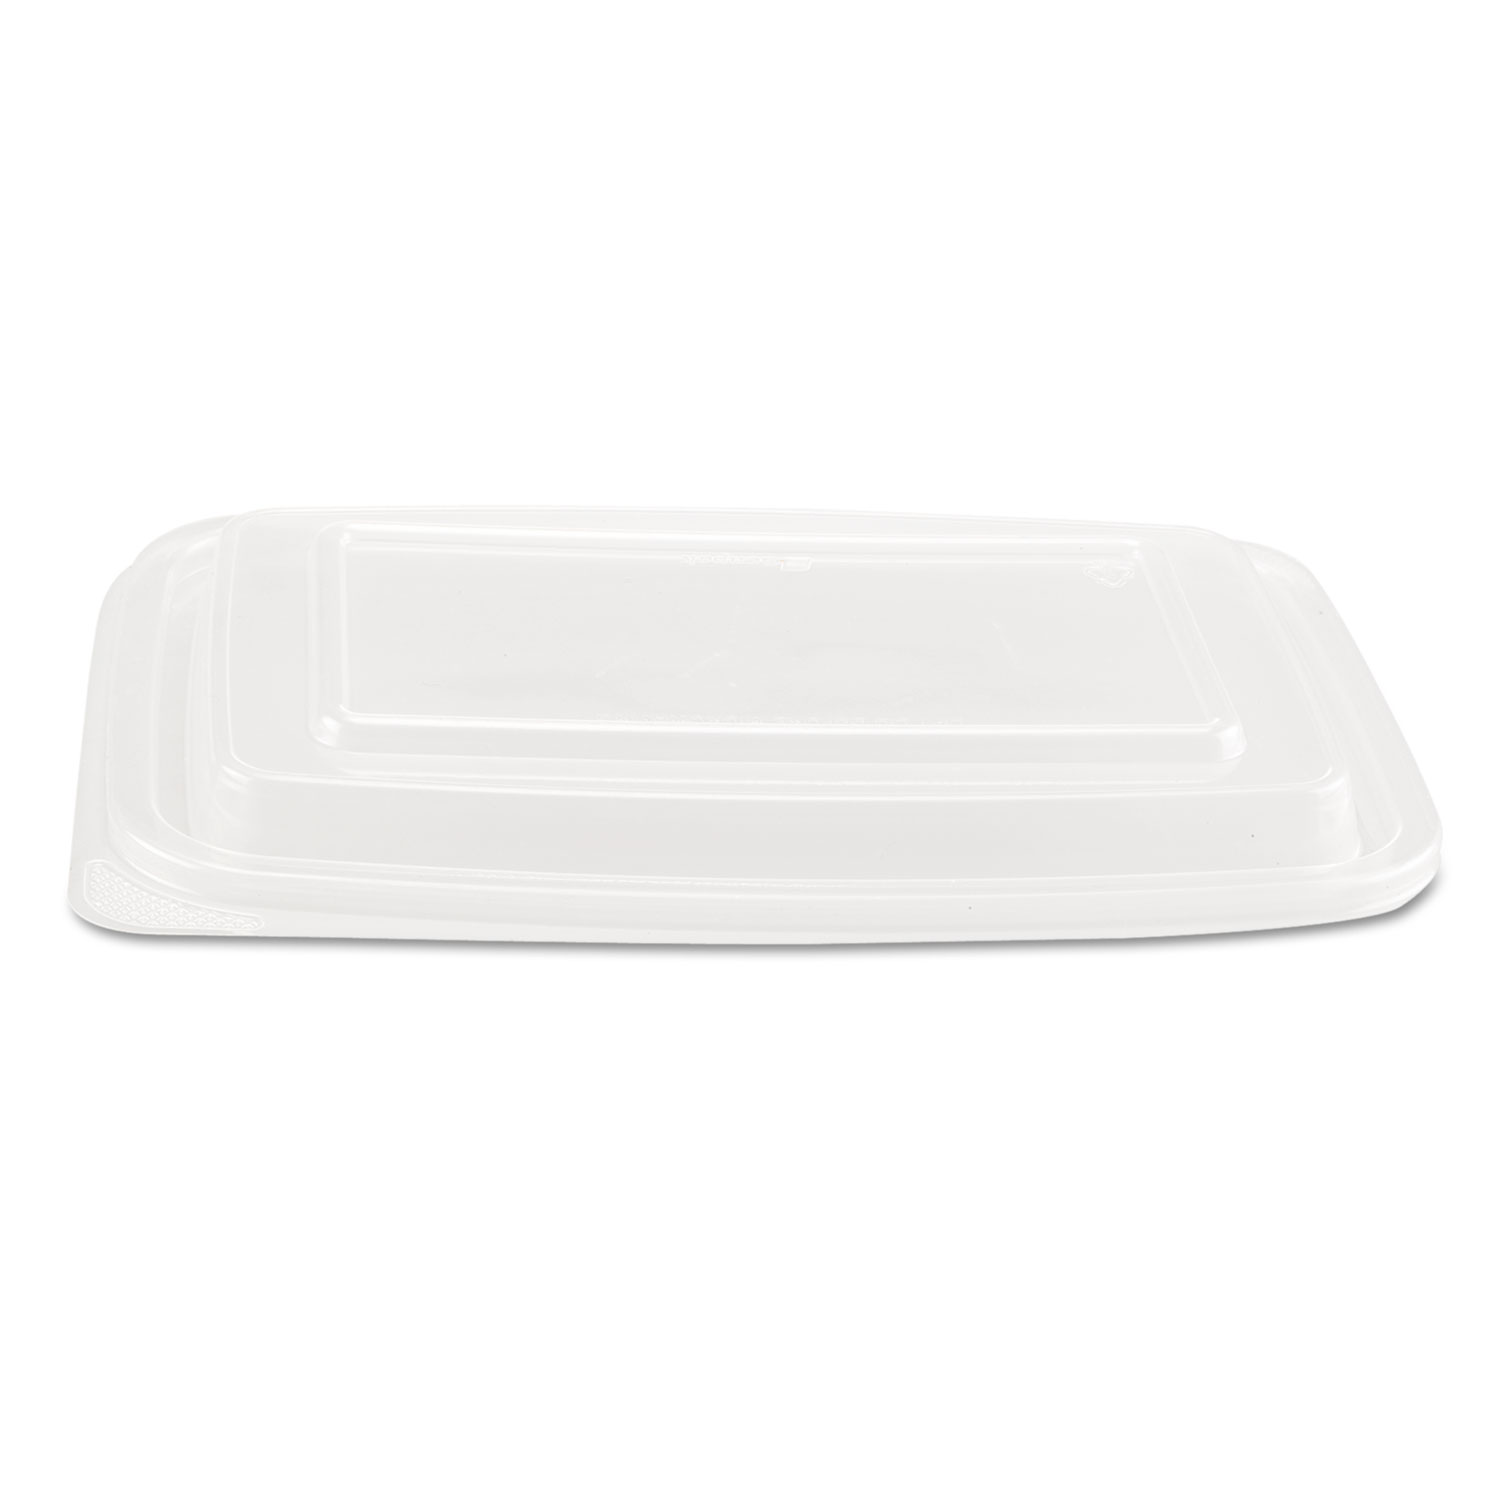 Genpak AD16 Hinged 16 oz Deli Take Out Food Container - 5 3/8L x